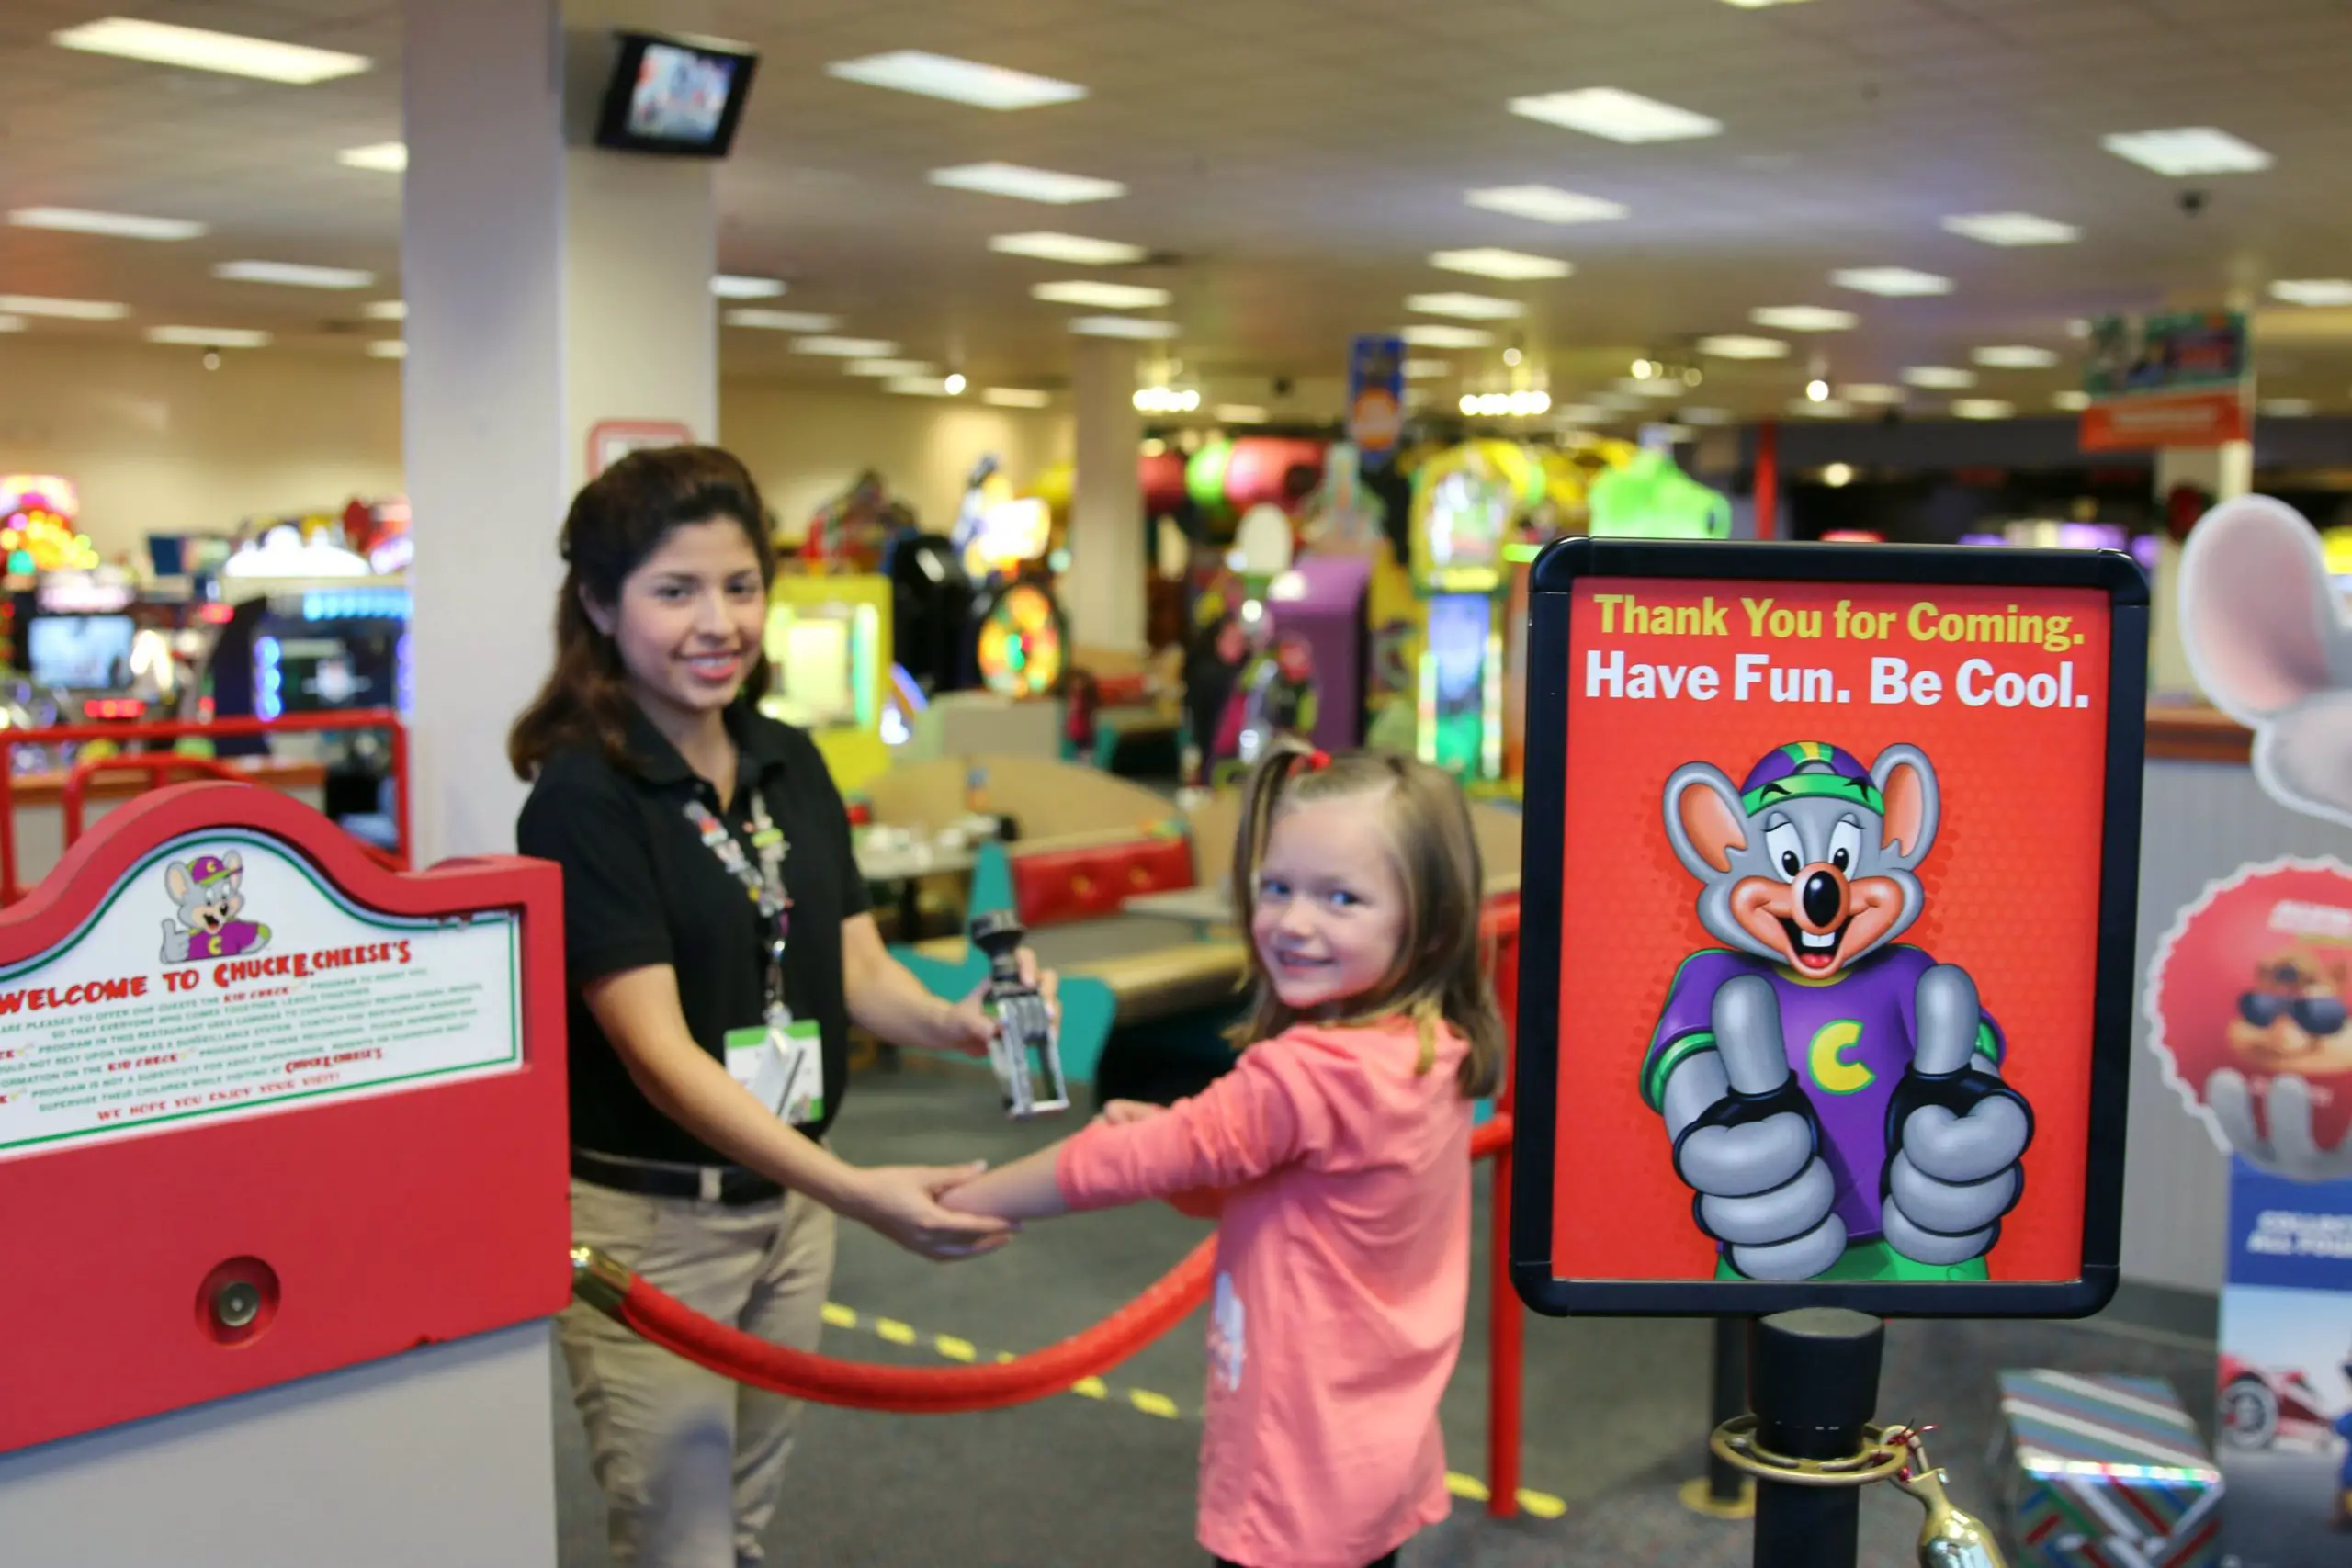 The Easiest Birthday Party Ever At Chuck E. Cheeseâs